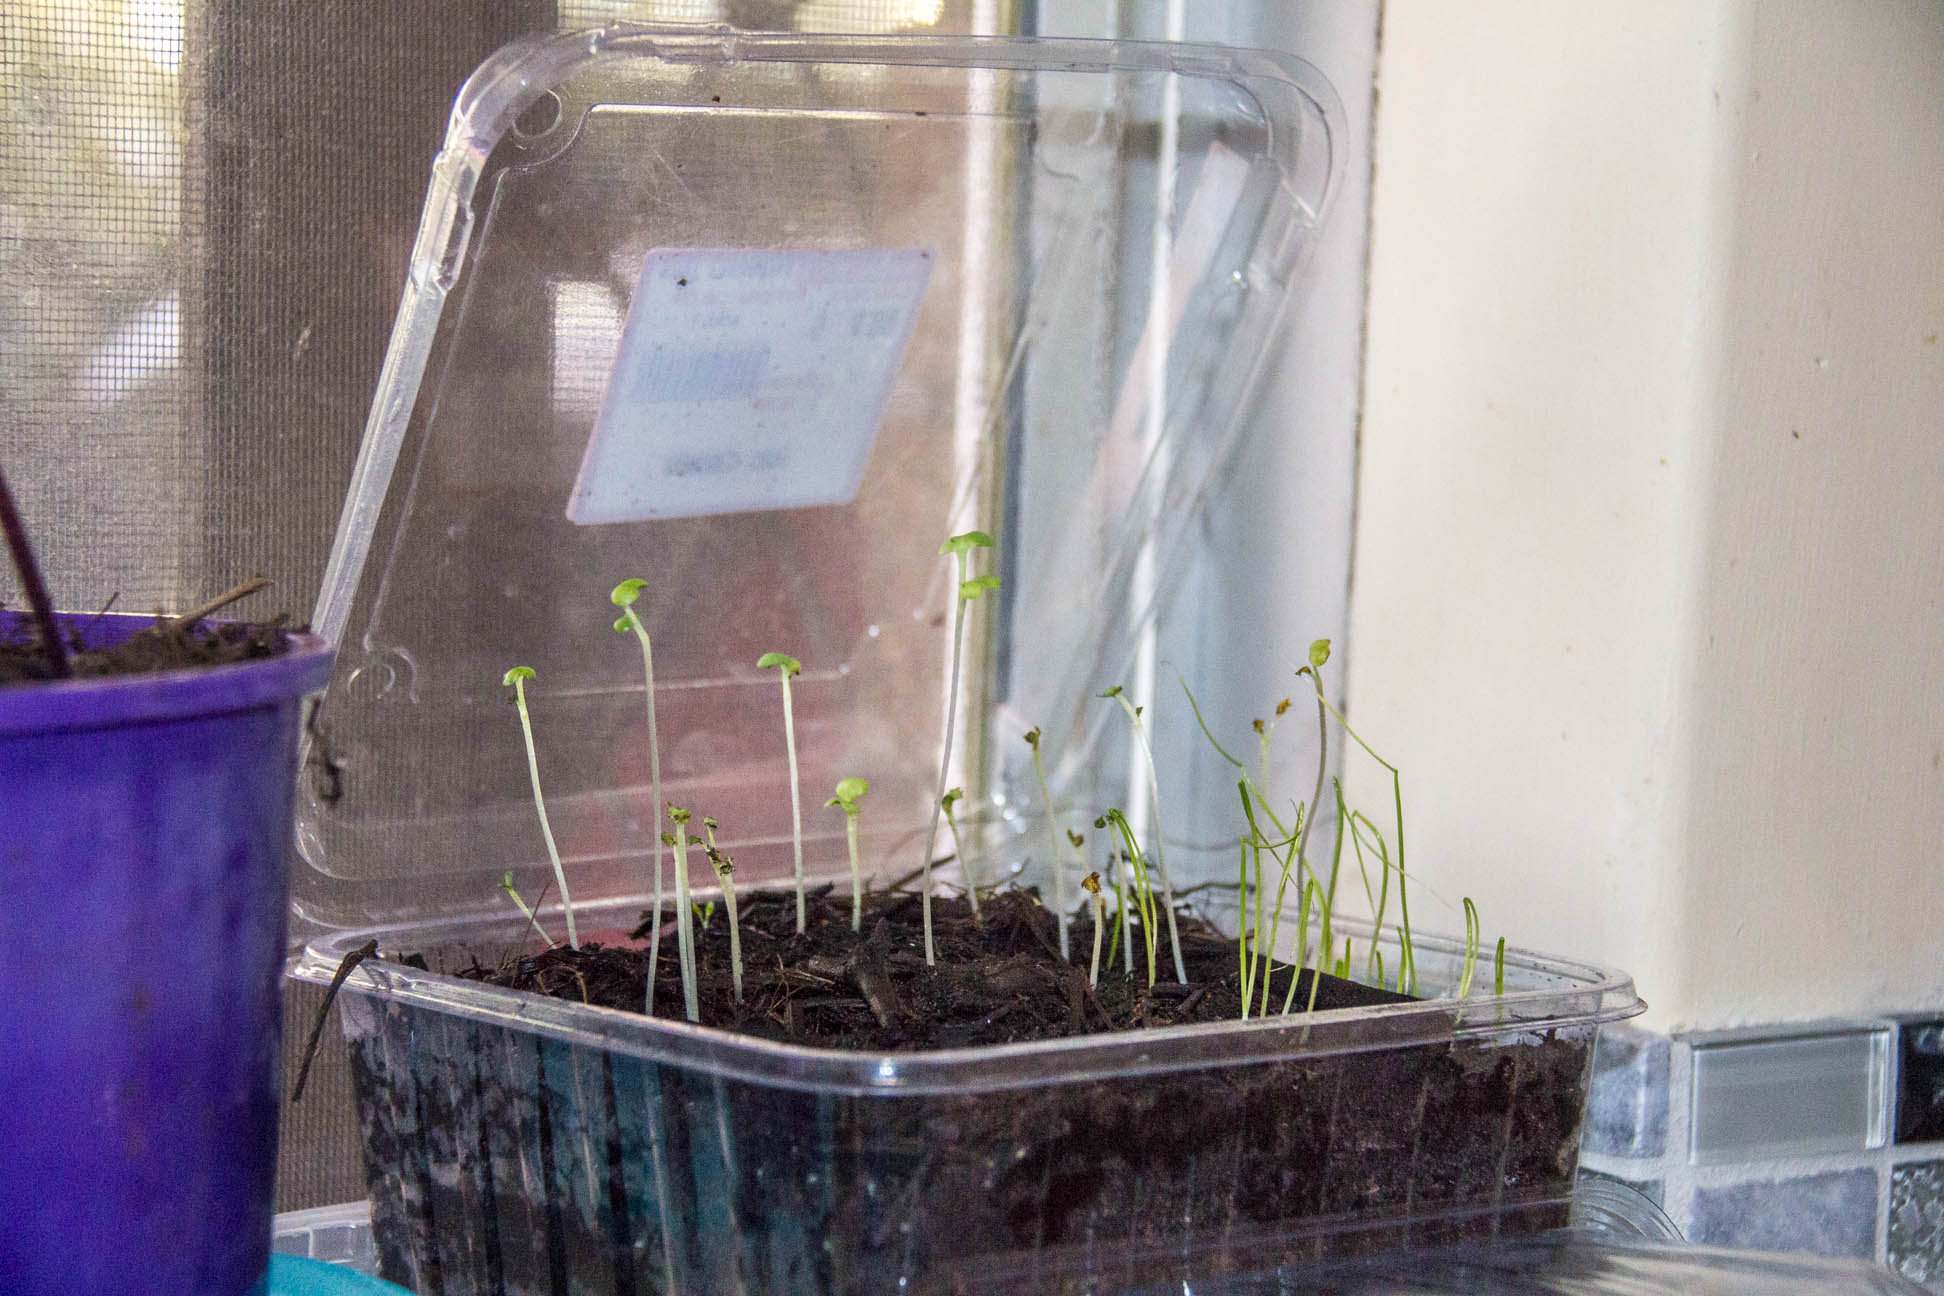 07/05/15 Day 14 seedlings are still growing tall and strong